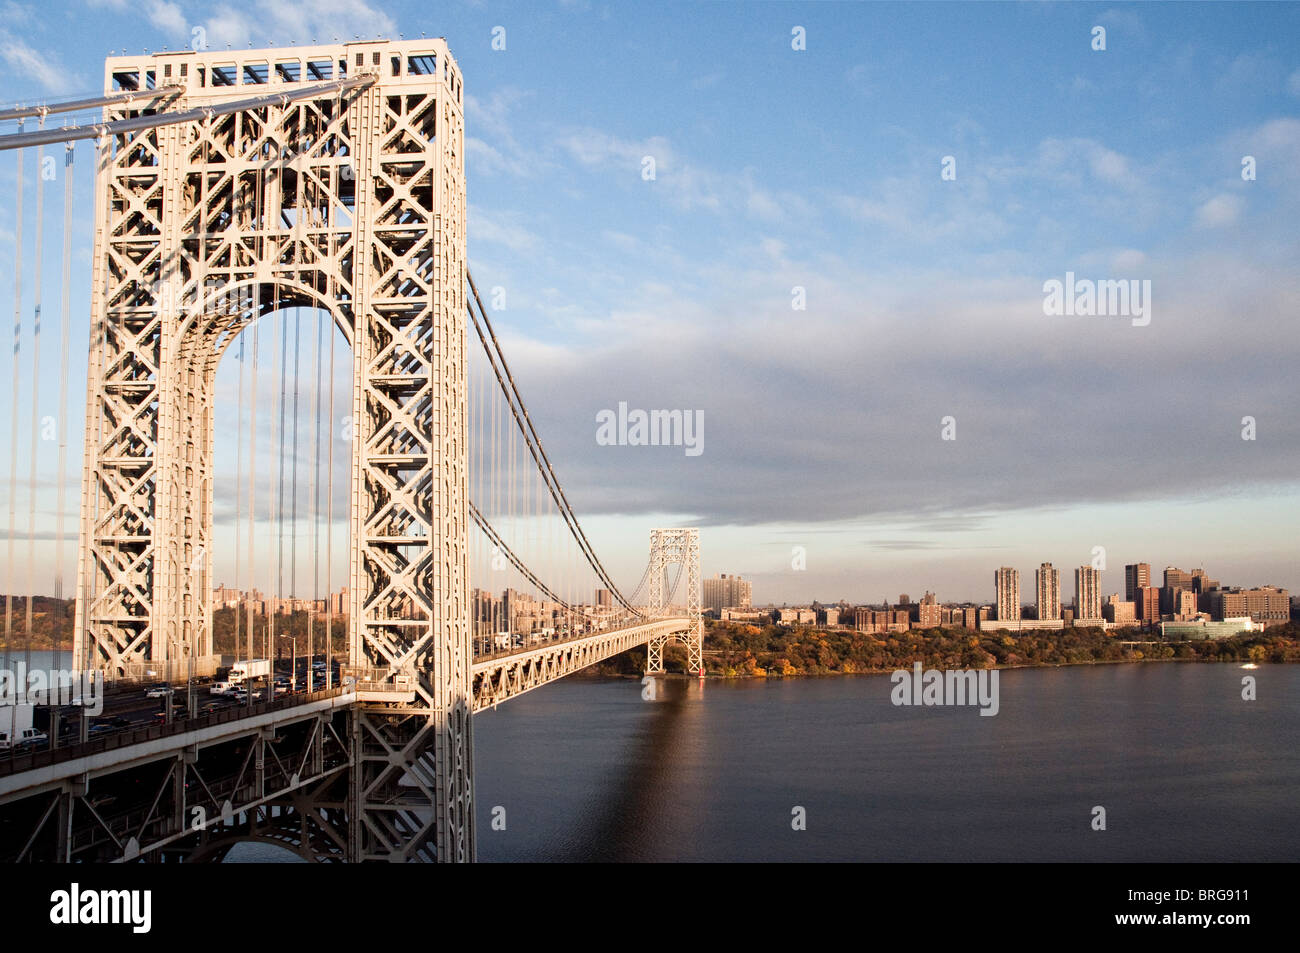 A view of the George Washington Bridge from the New Jersey side of the Hudson River. Manhattan can be seen in the distance. Stock Photo